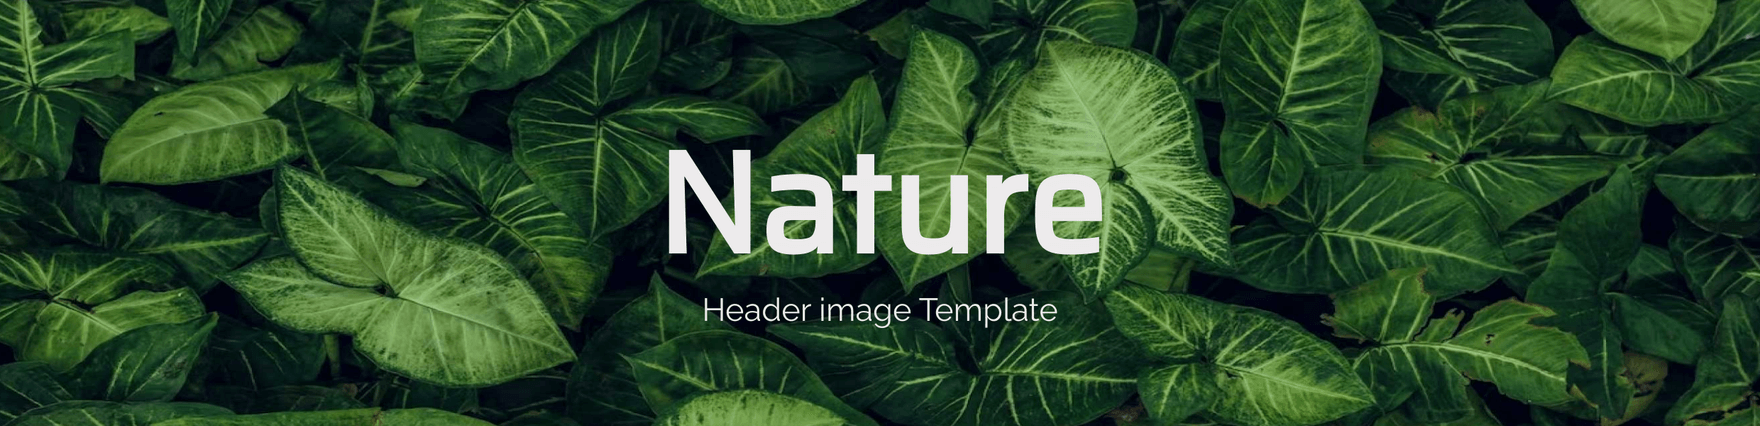 Nature Header Image Template